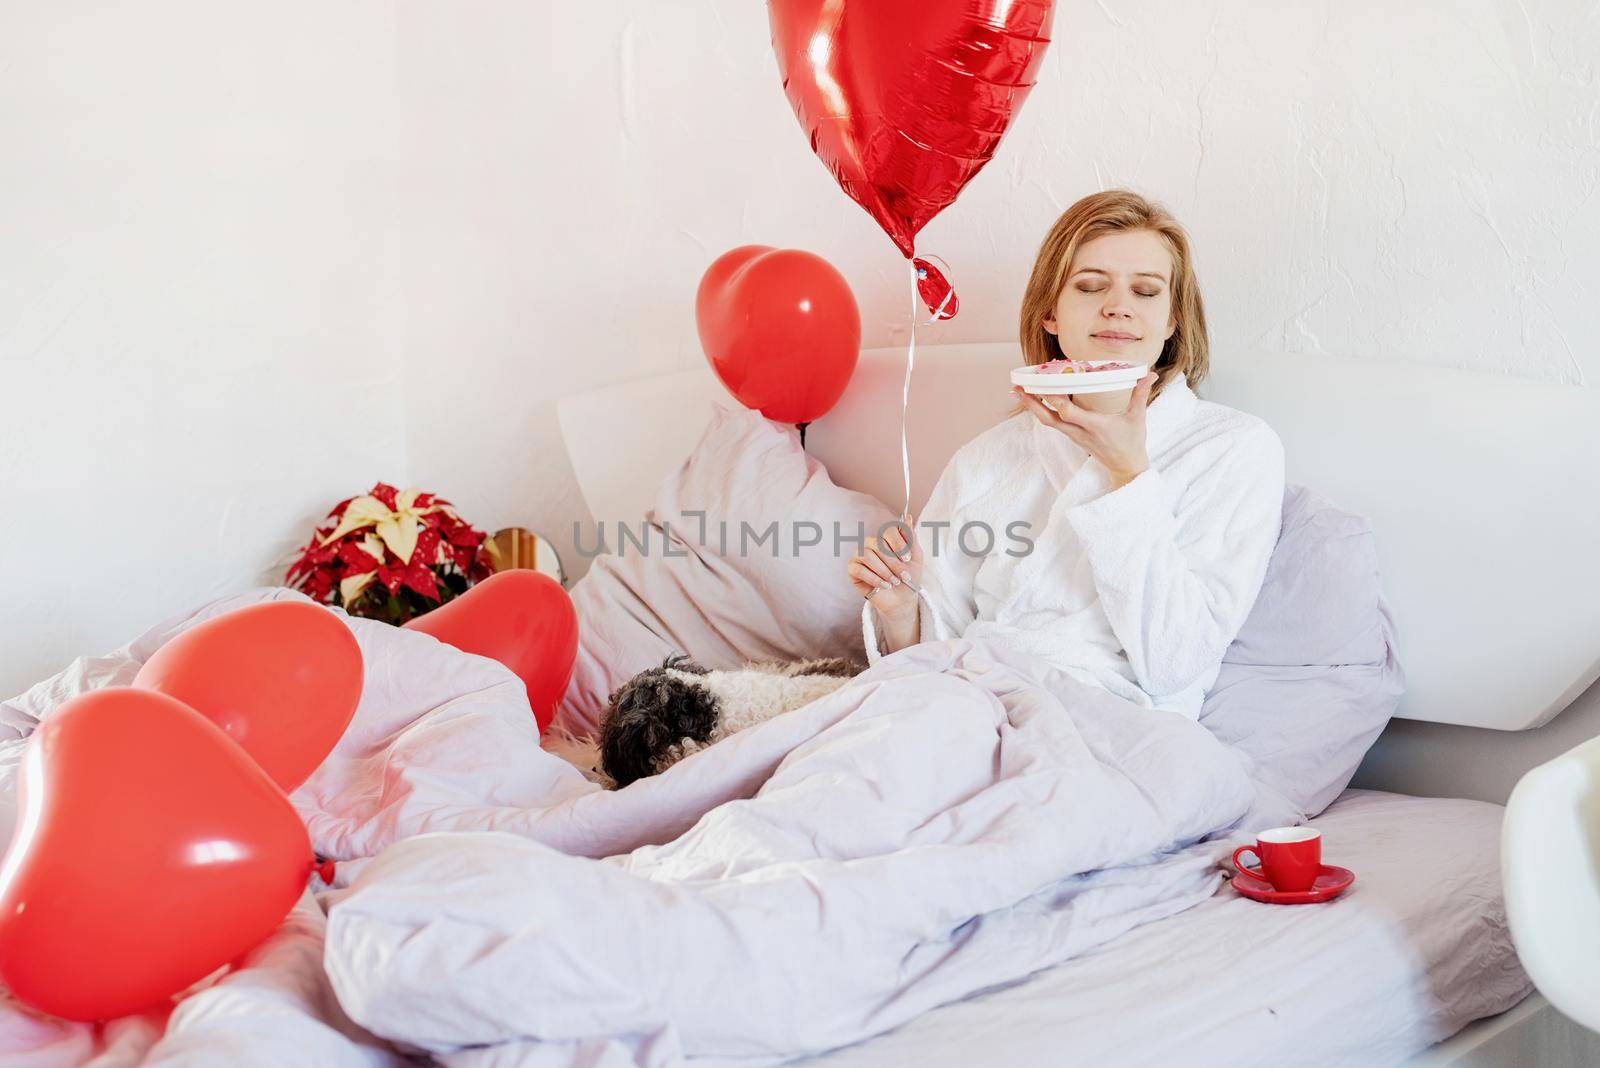 young woman lying on the bed and looking atred balloon by Desperada